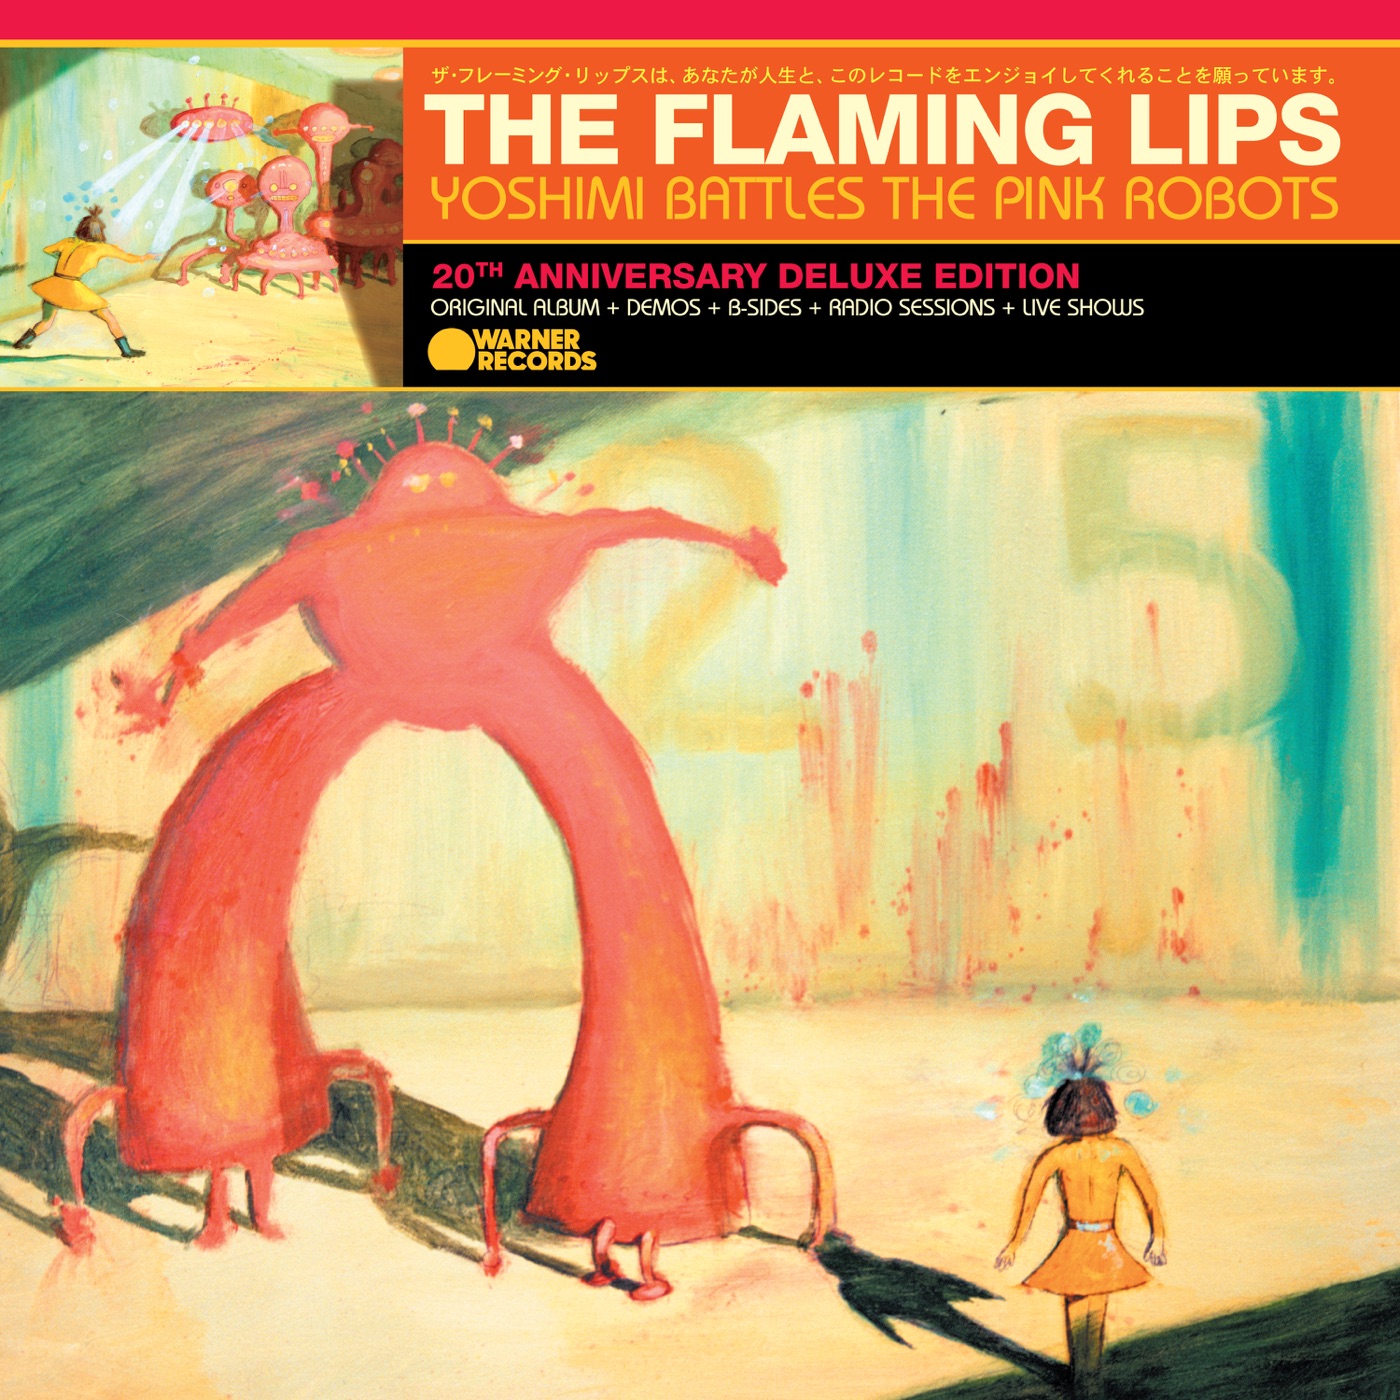 Yoshimi Battles the Pink Robots by The Flaming Lips